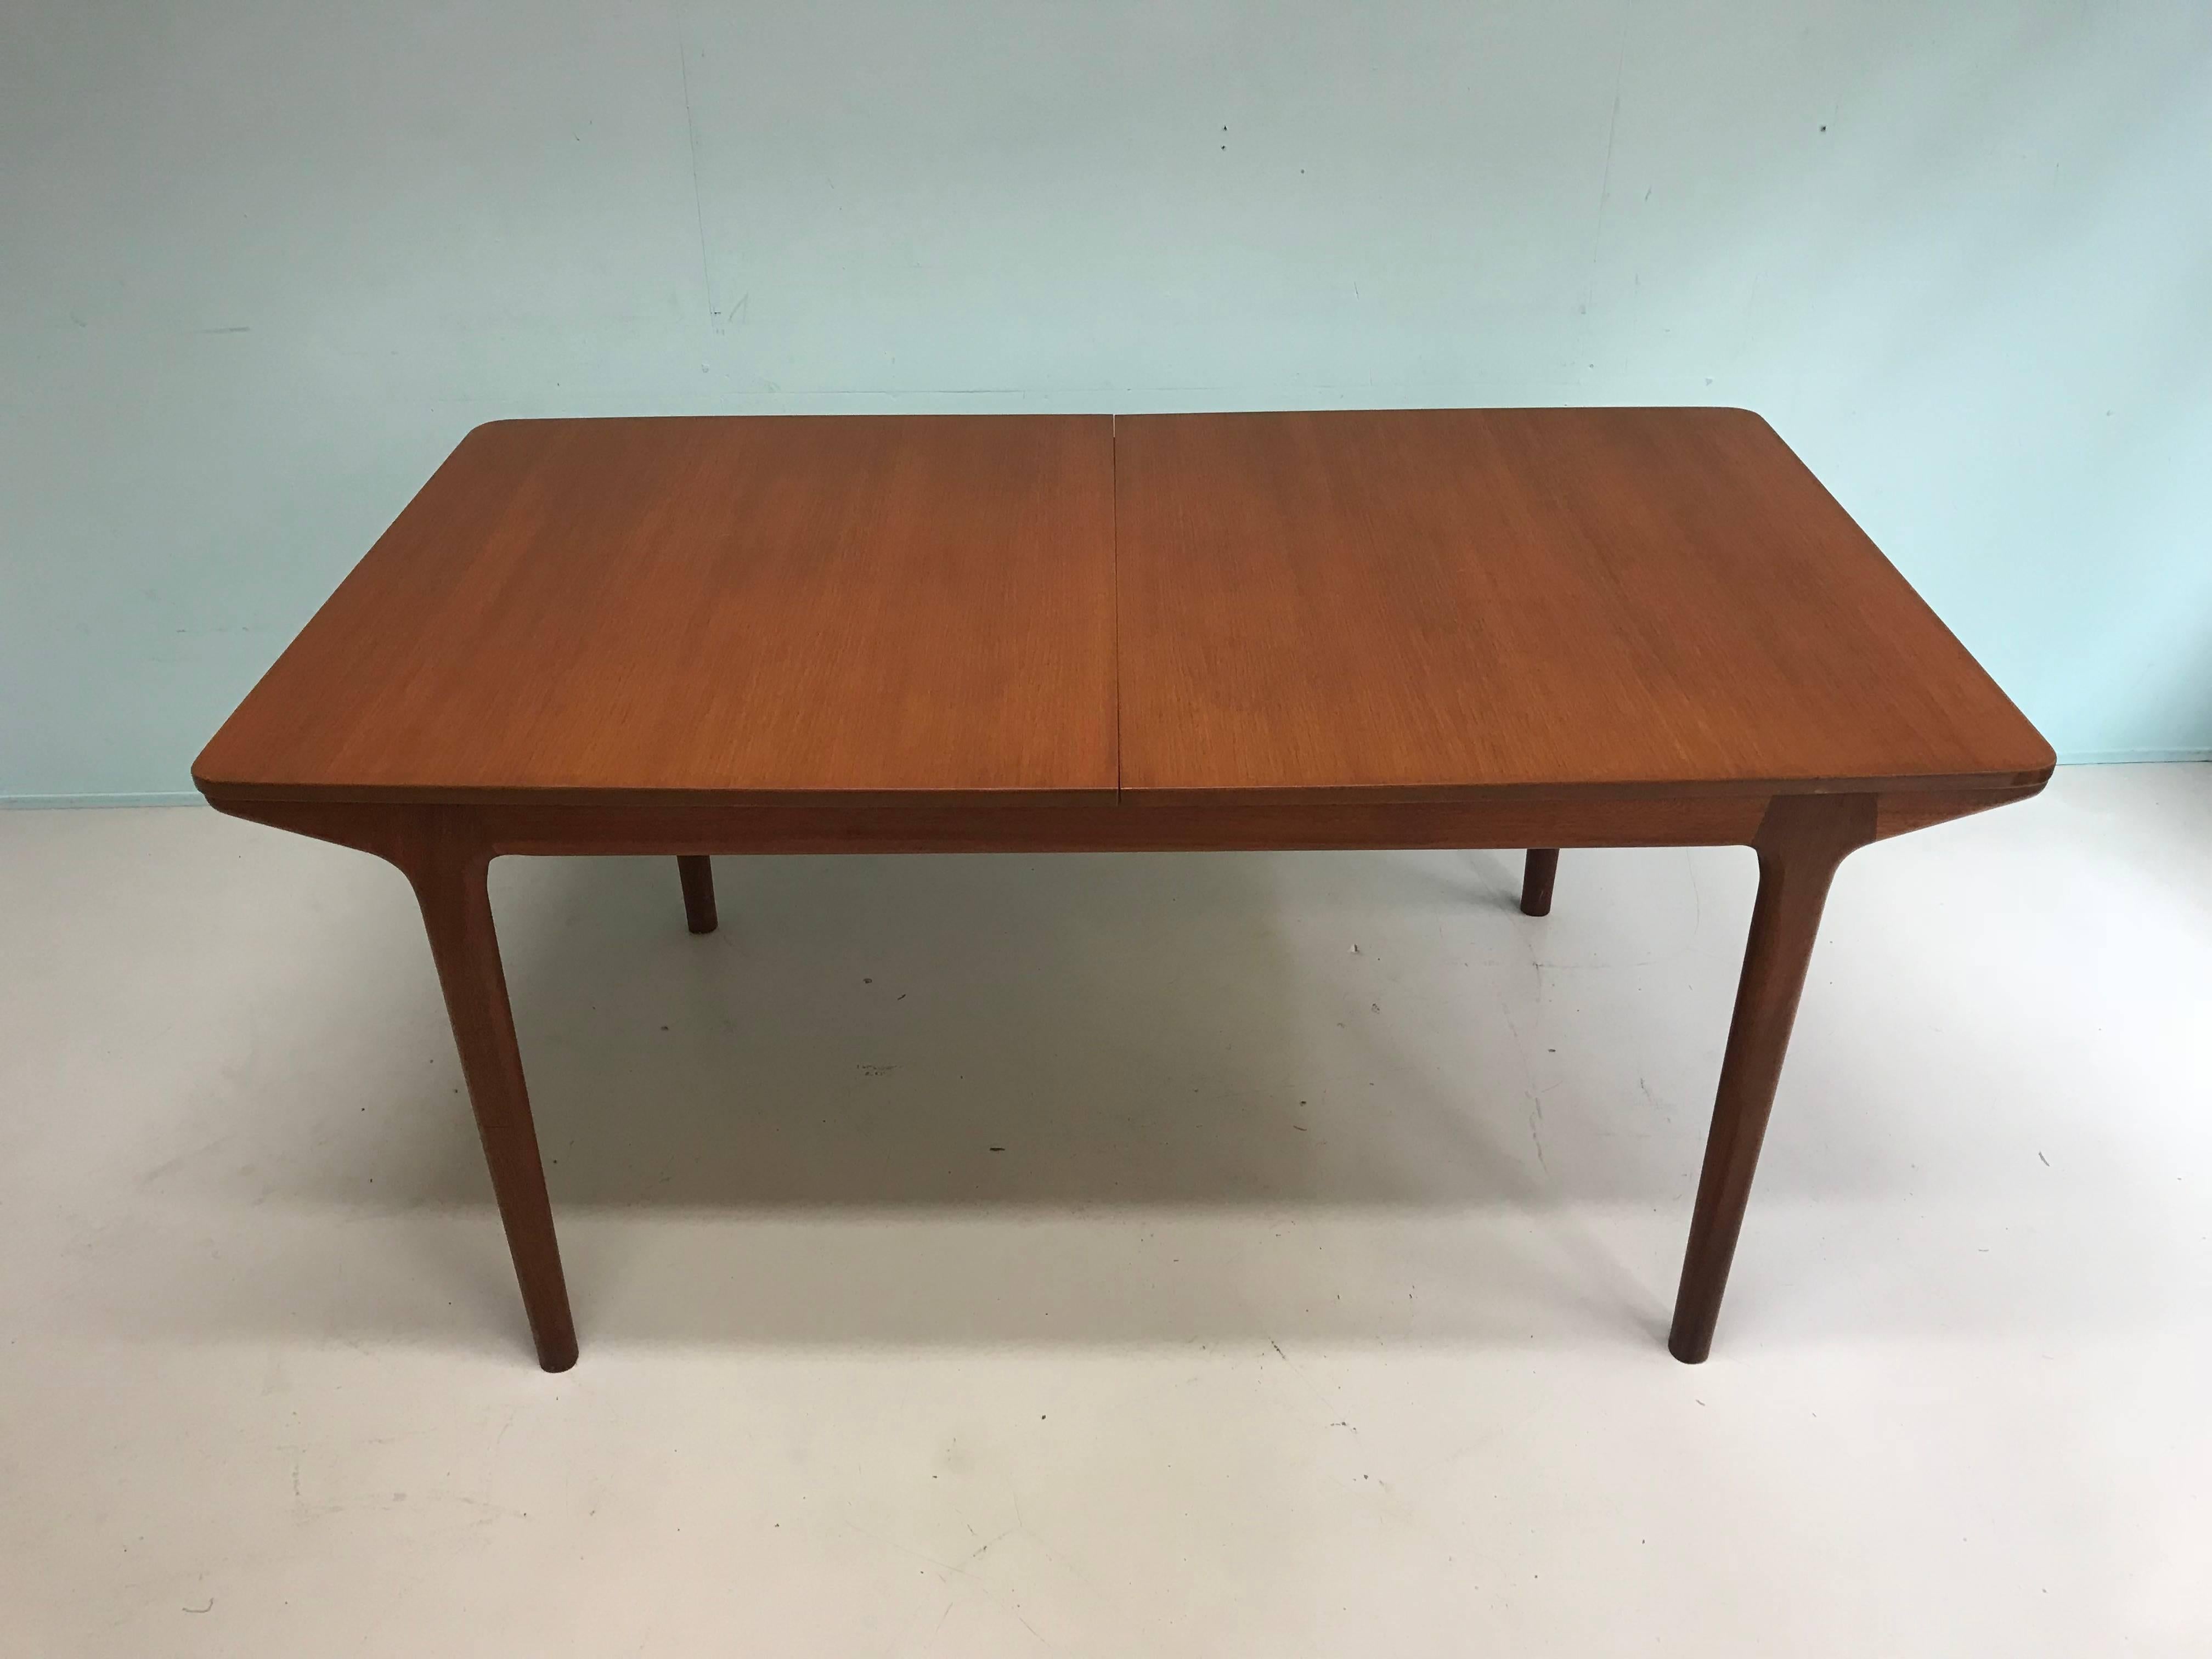 MacIntosh dining table made of teak in a good condition designed by Tom Robertson
Very genius system to make the table longer in two steps.
Condition: very good
period: 1960s

Measurements:
Normal:
160 cm W, 91.5 cm D, 74 cm H
1 step:
198